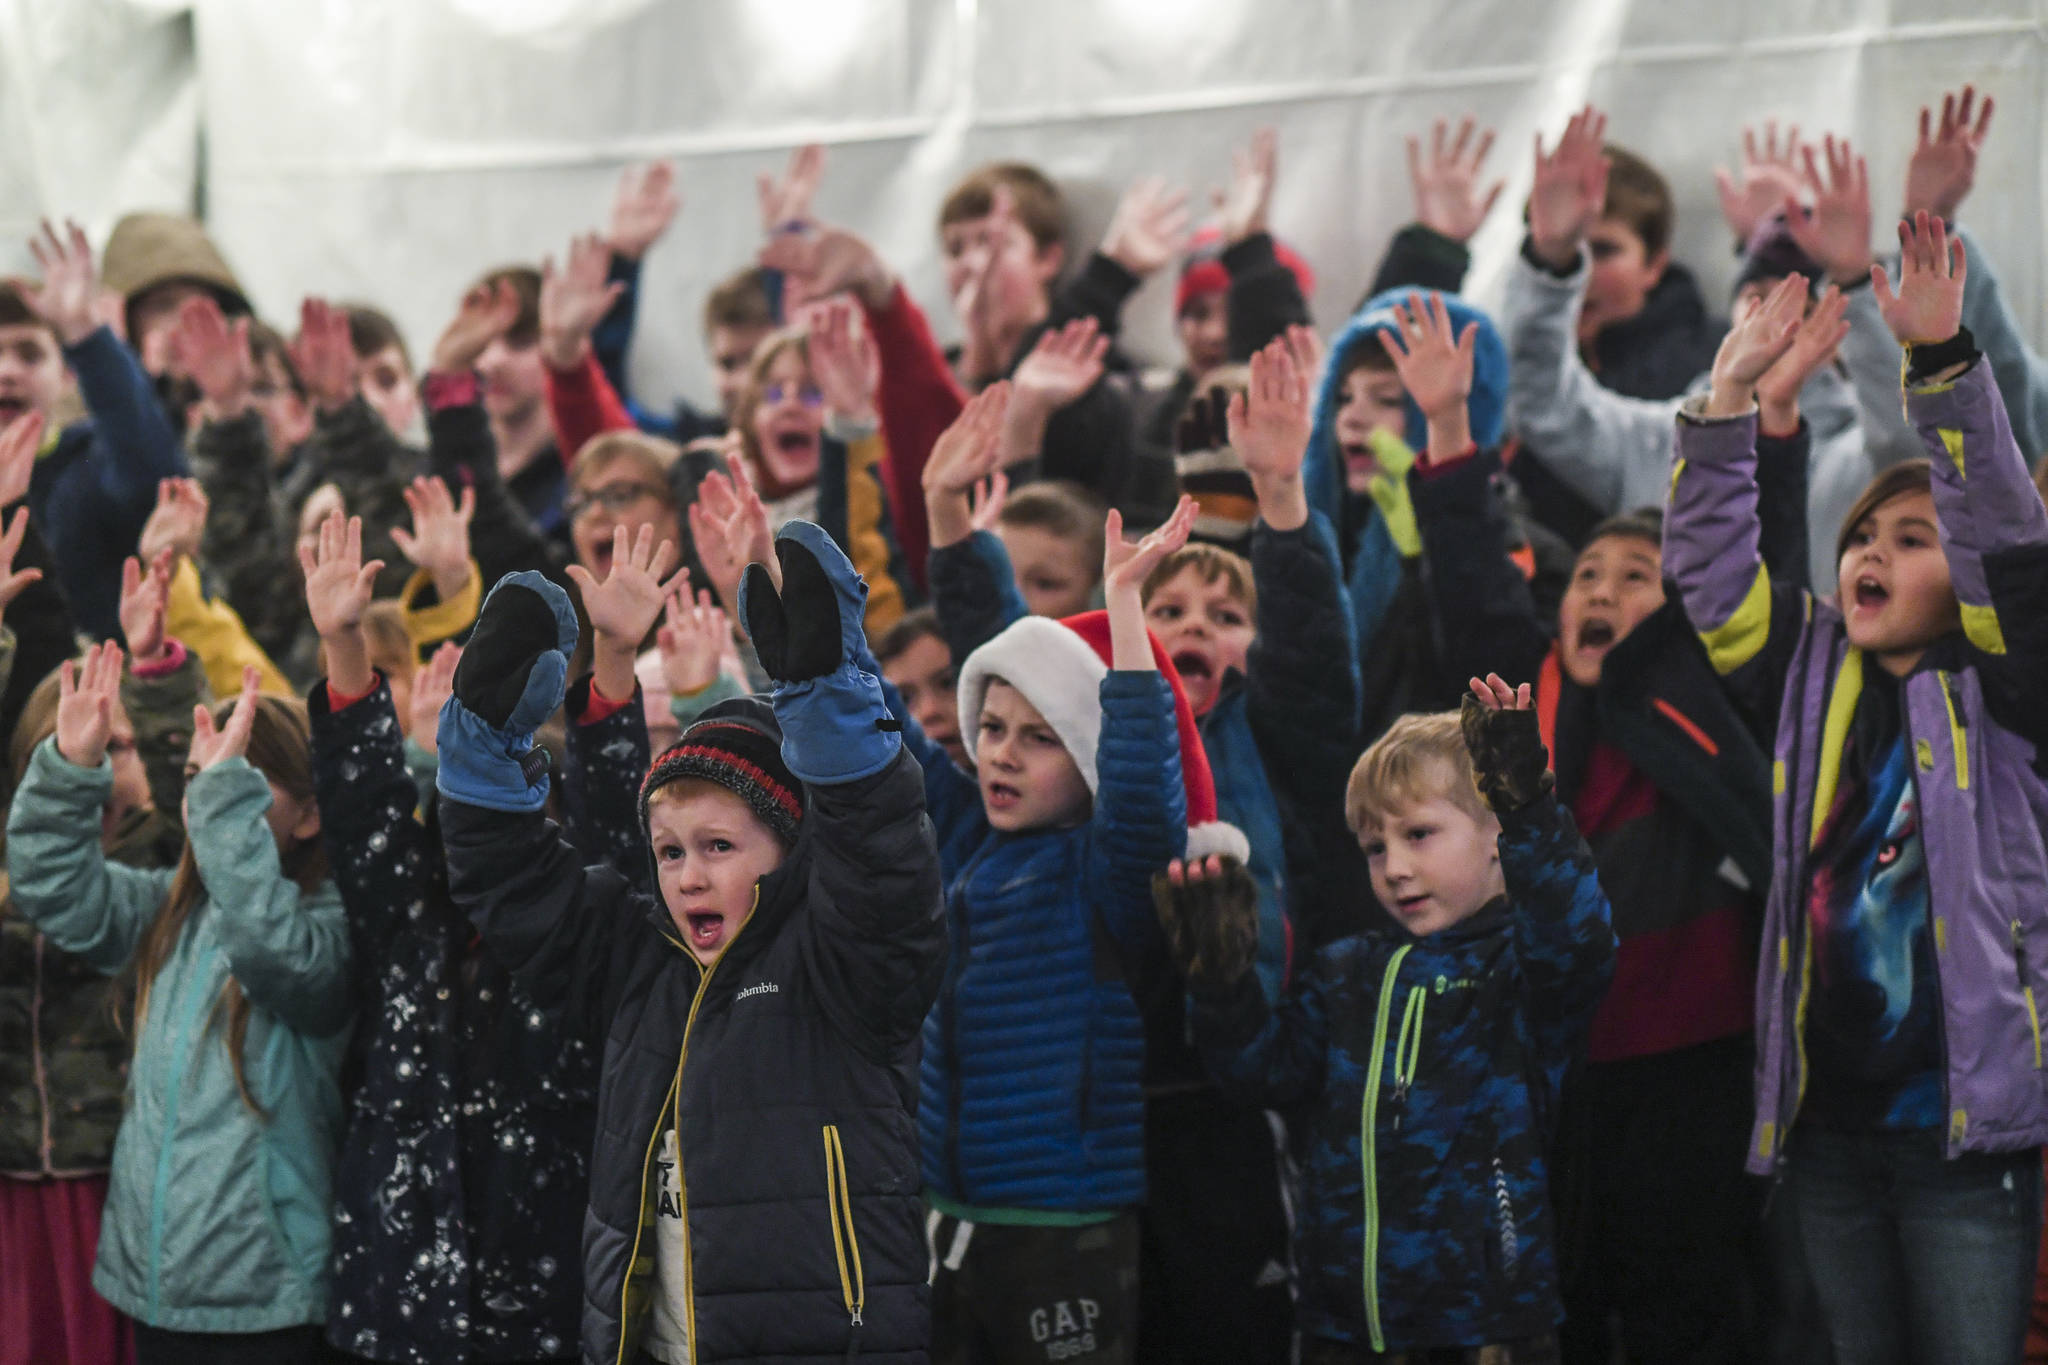 Students with the Faith Community Christian School sing outside during the Governor’s Open House on Tuesday, Dec. 10, 2019. (Michael Penn | Juneau Empire)